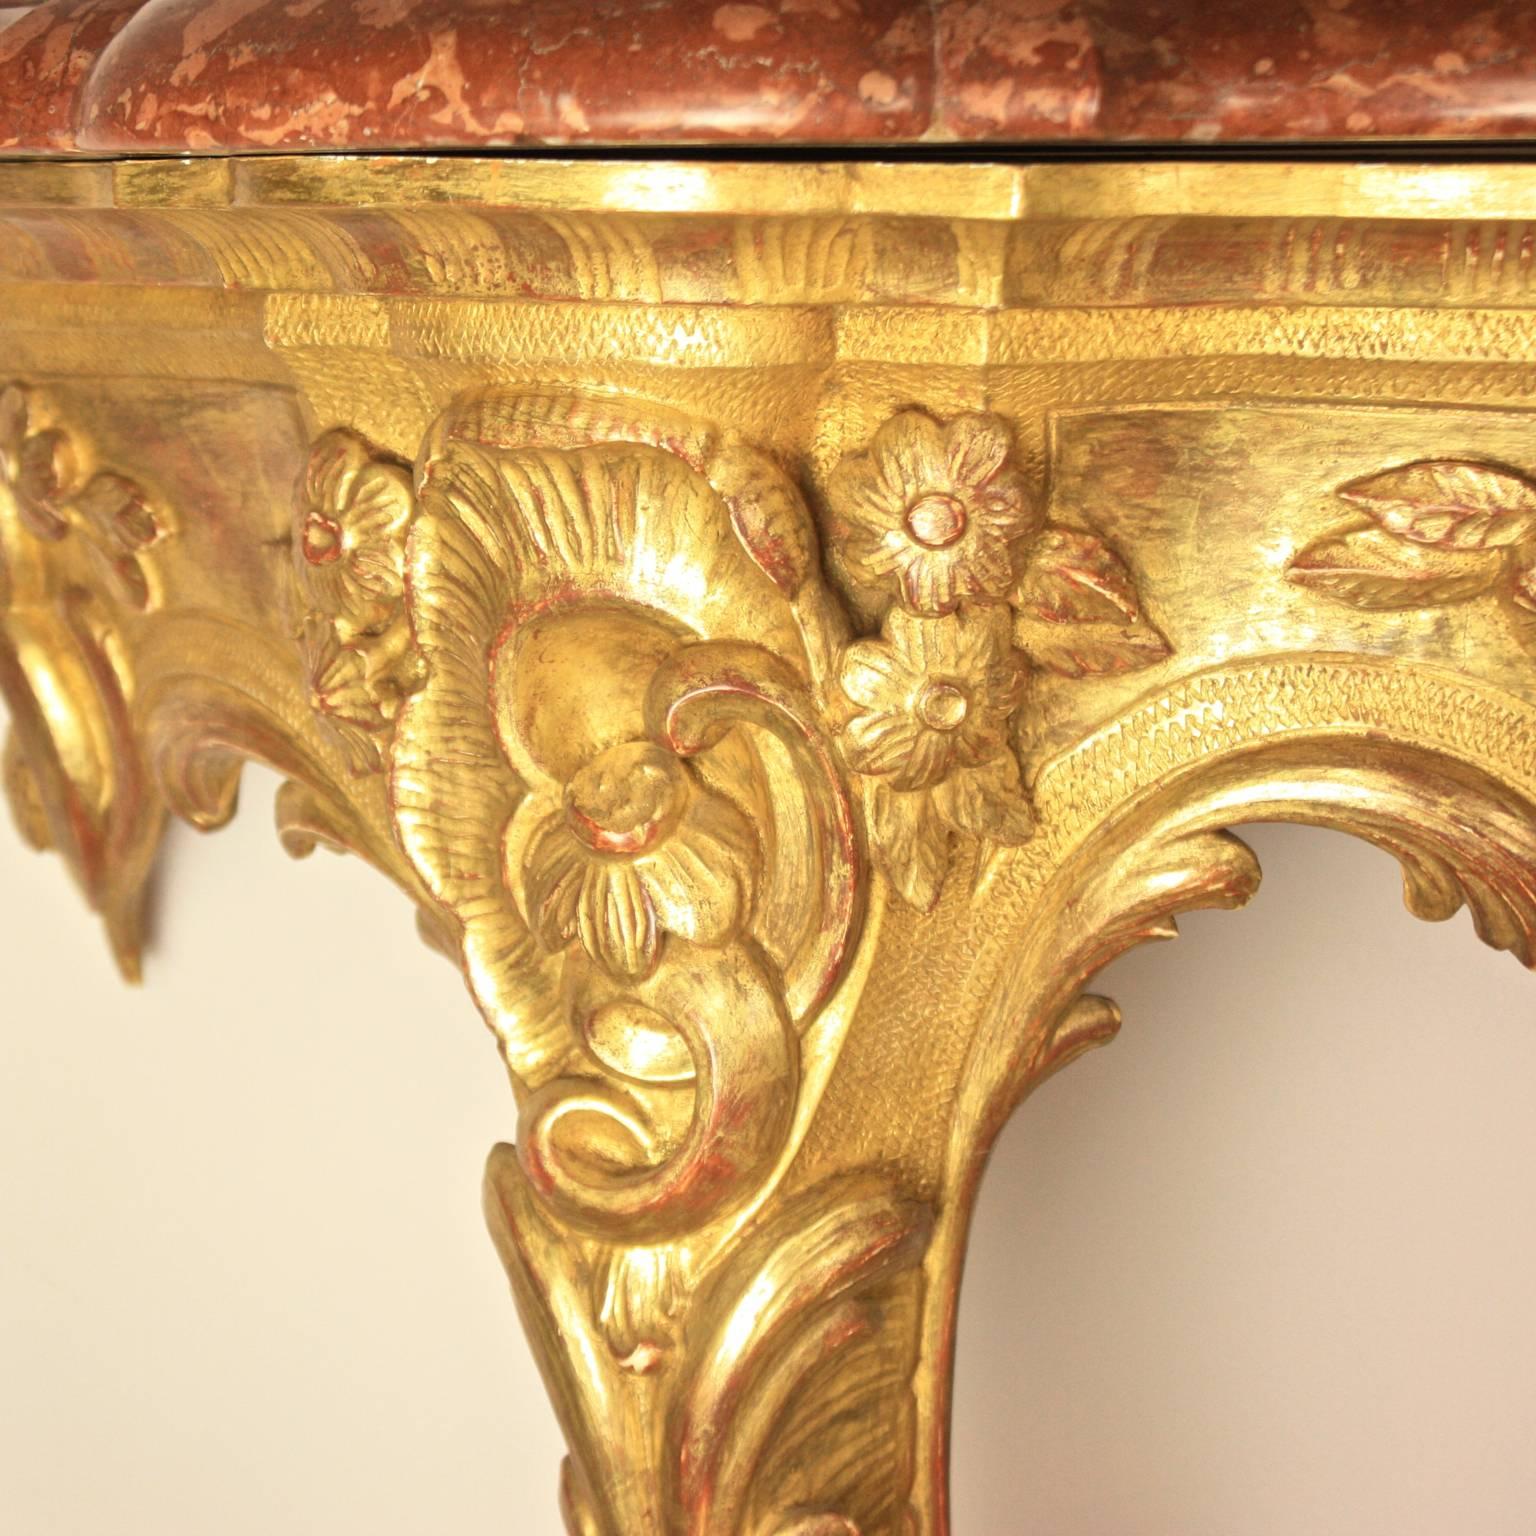 An Italian early 20th century Louis XV style giltwood console table with a red Breccia marble top of serpentine form above a pierced frieze and stretcher carved with rocaille, flowers and leaves on cabriole legs similarly carved. Water gilding of